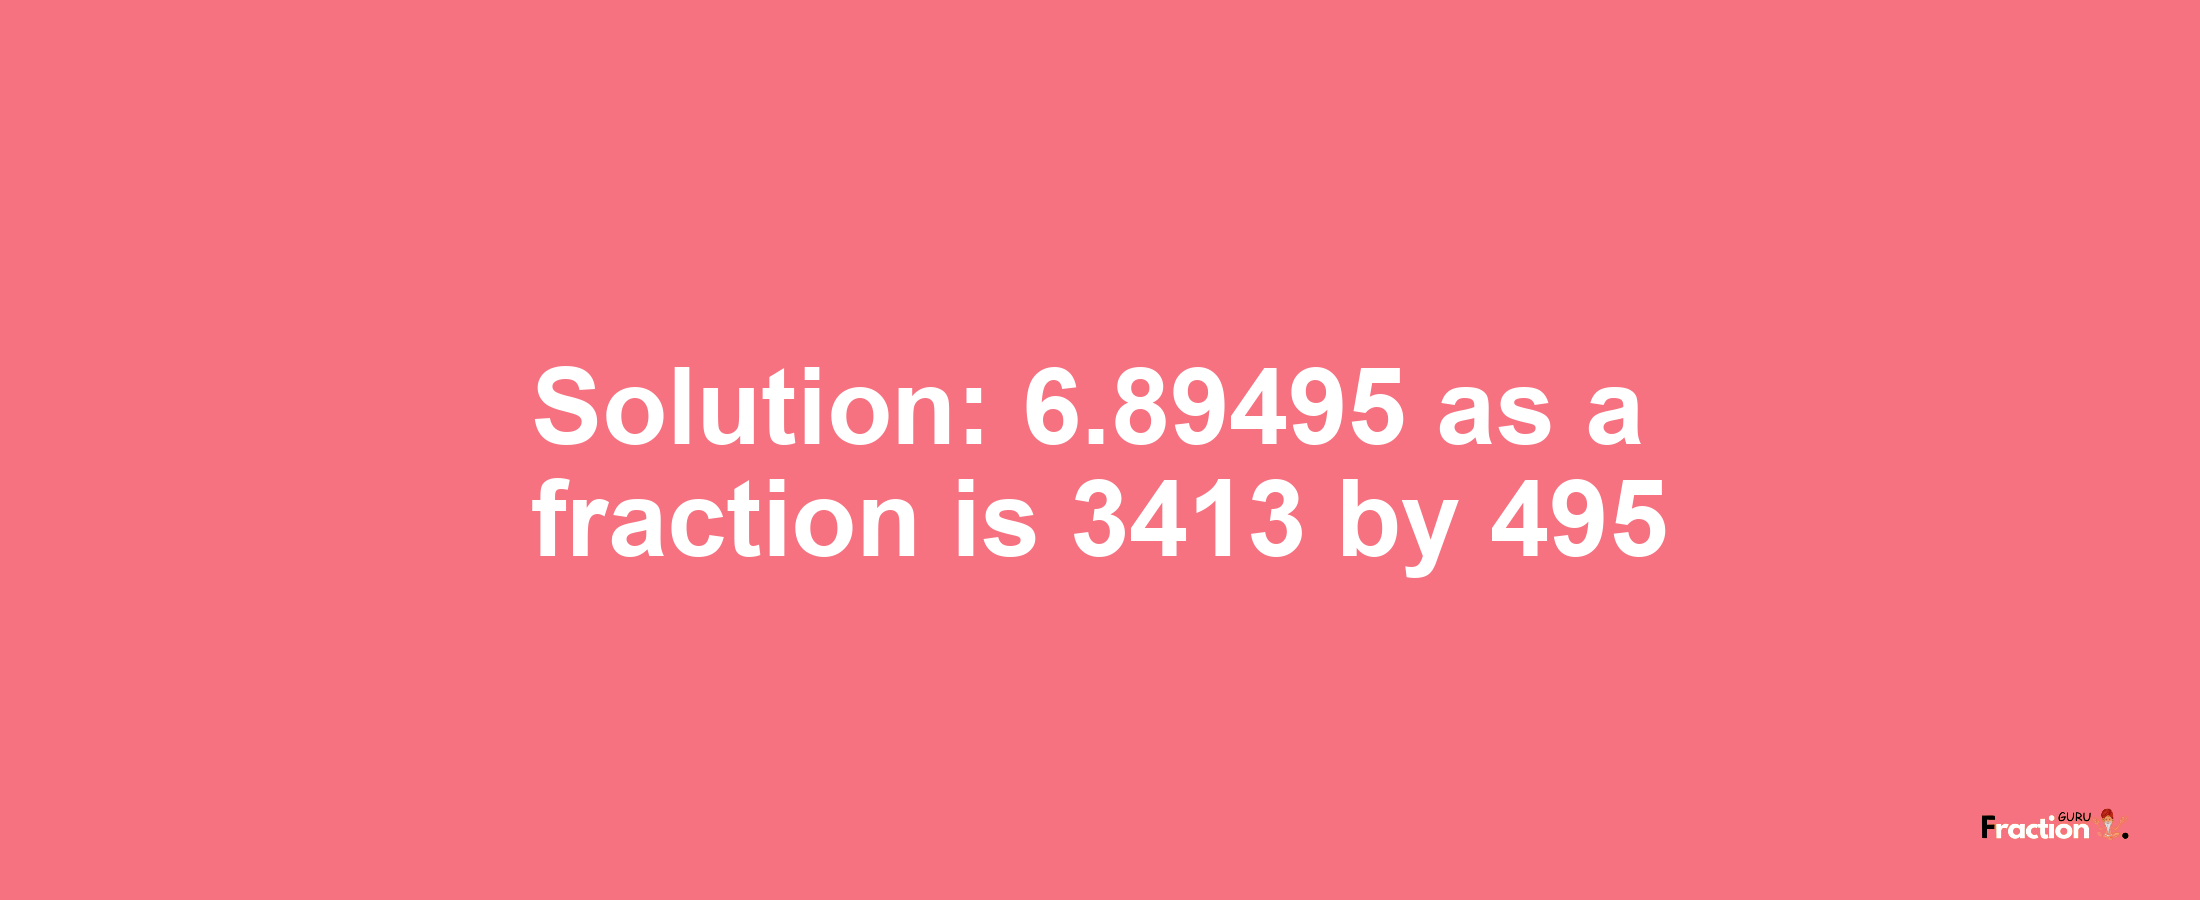 Solution:6.89495 as a fraction is 3413/495